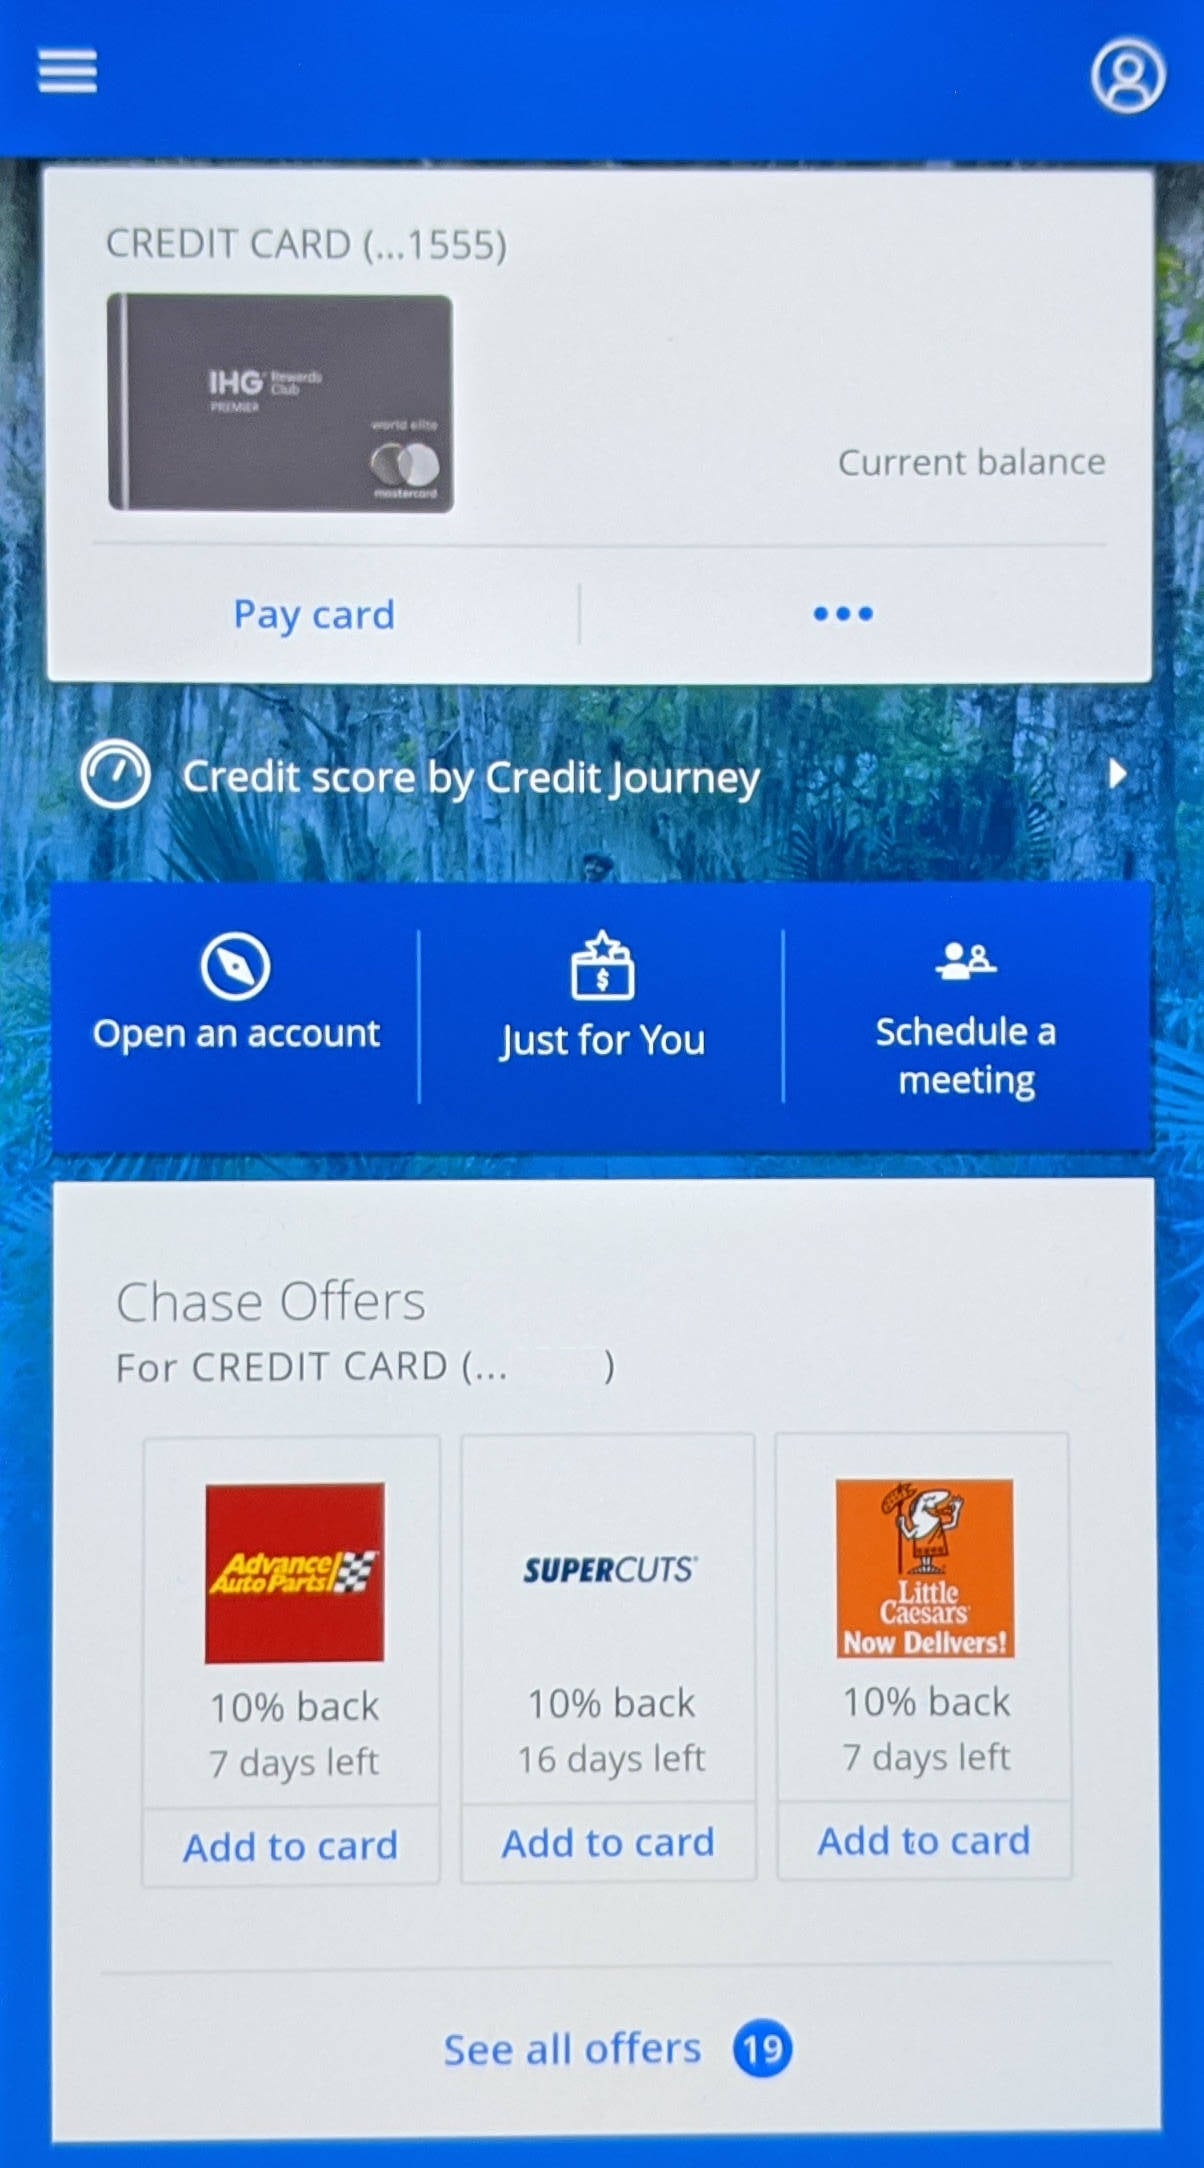 Chase Offers Full guide to using The Points Guy